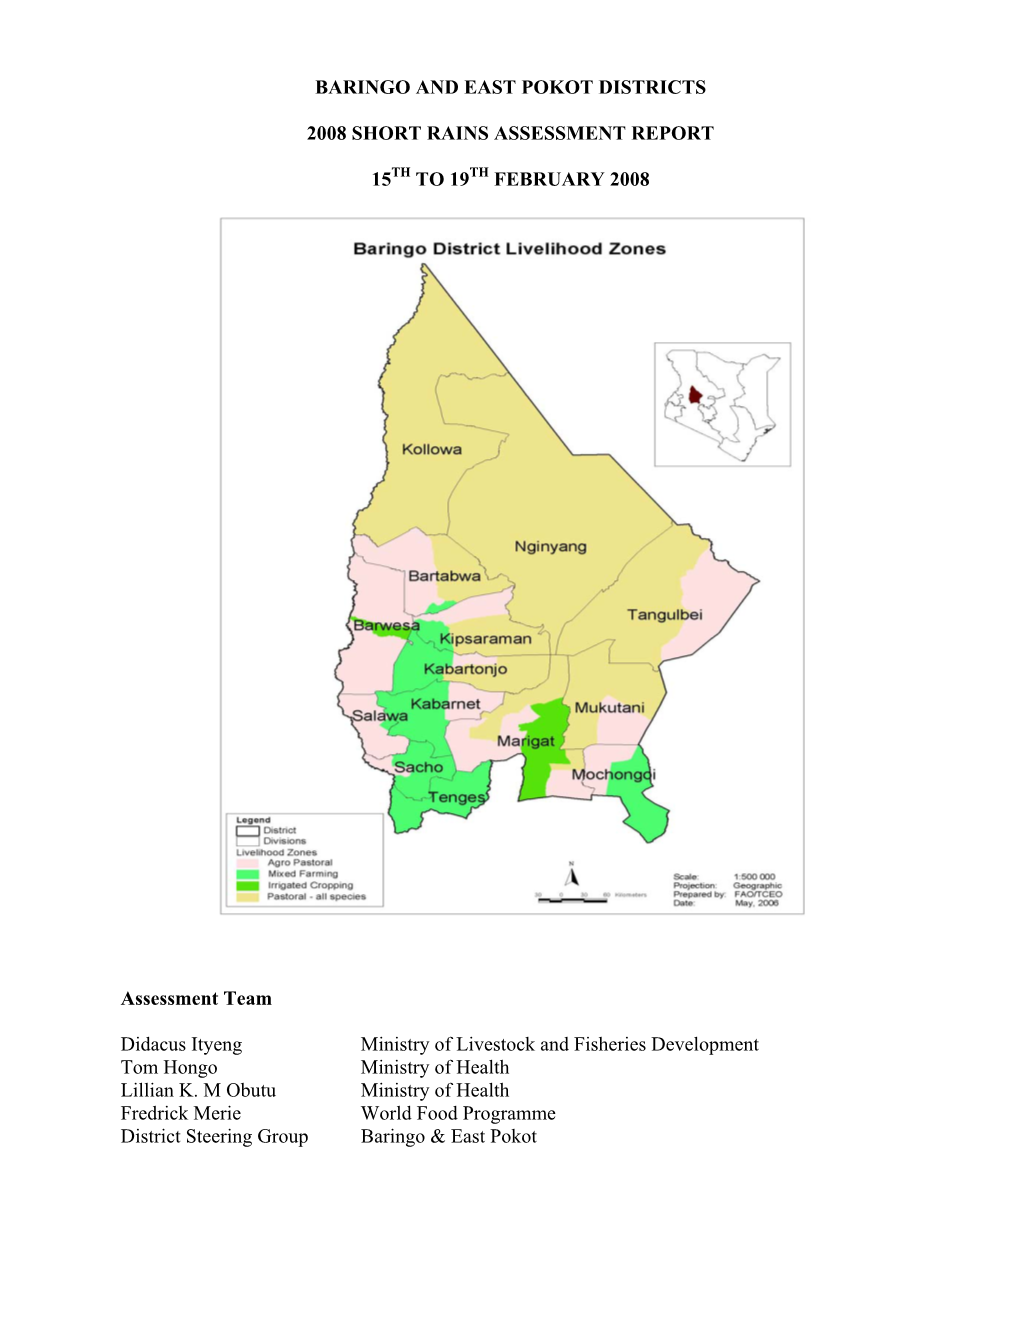 Baringo and East Pokot Districts